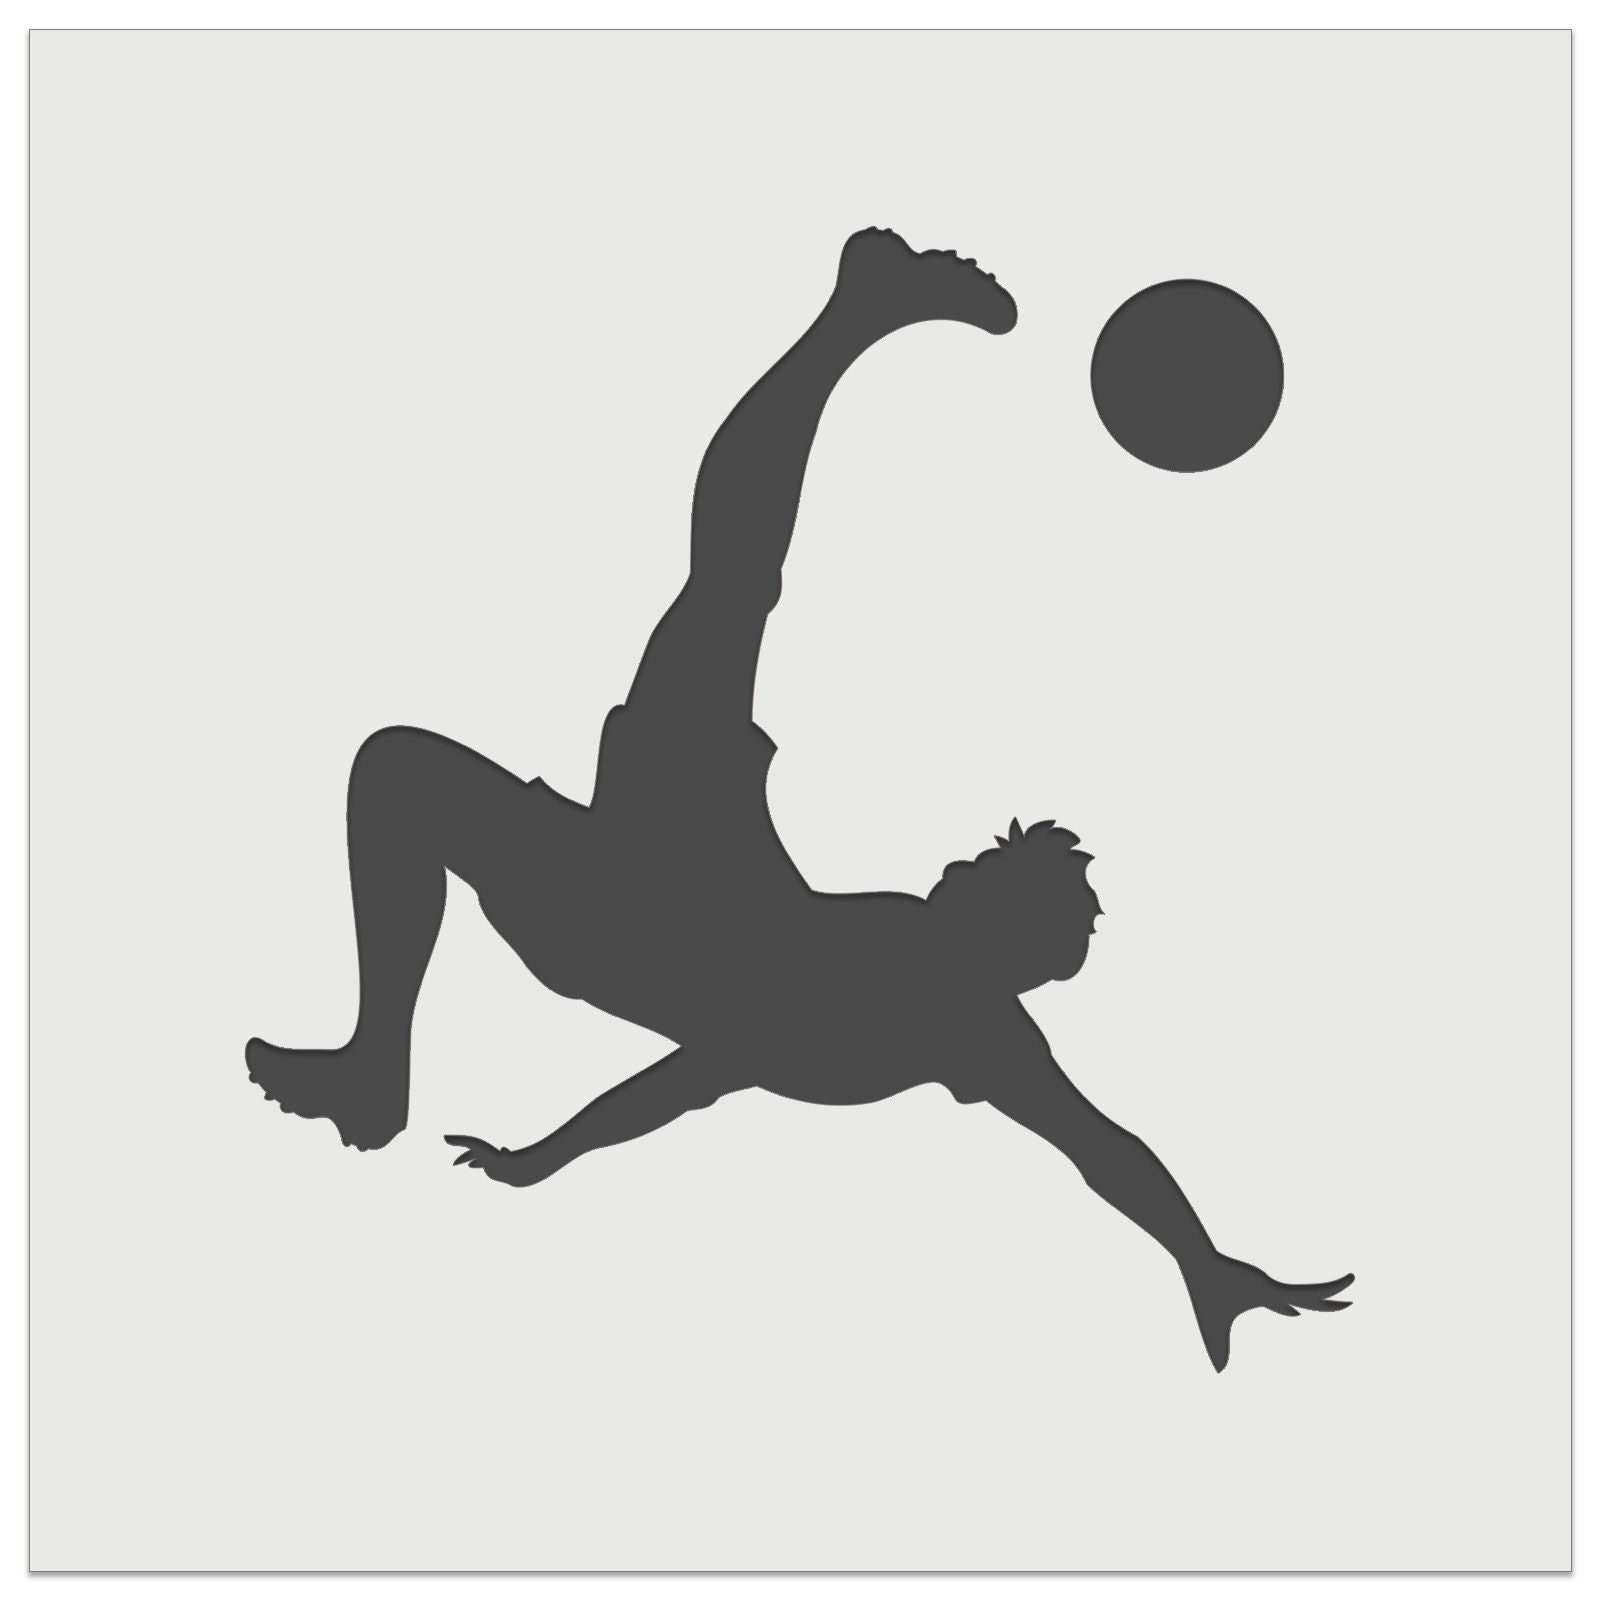  Soccer Stencil, 4.5 x 6 inch (S) - Decorative Football Player  Sport Wall Stencils for Painting Template : Arts, Crafts & Sewing